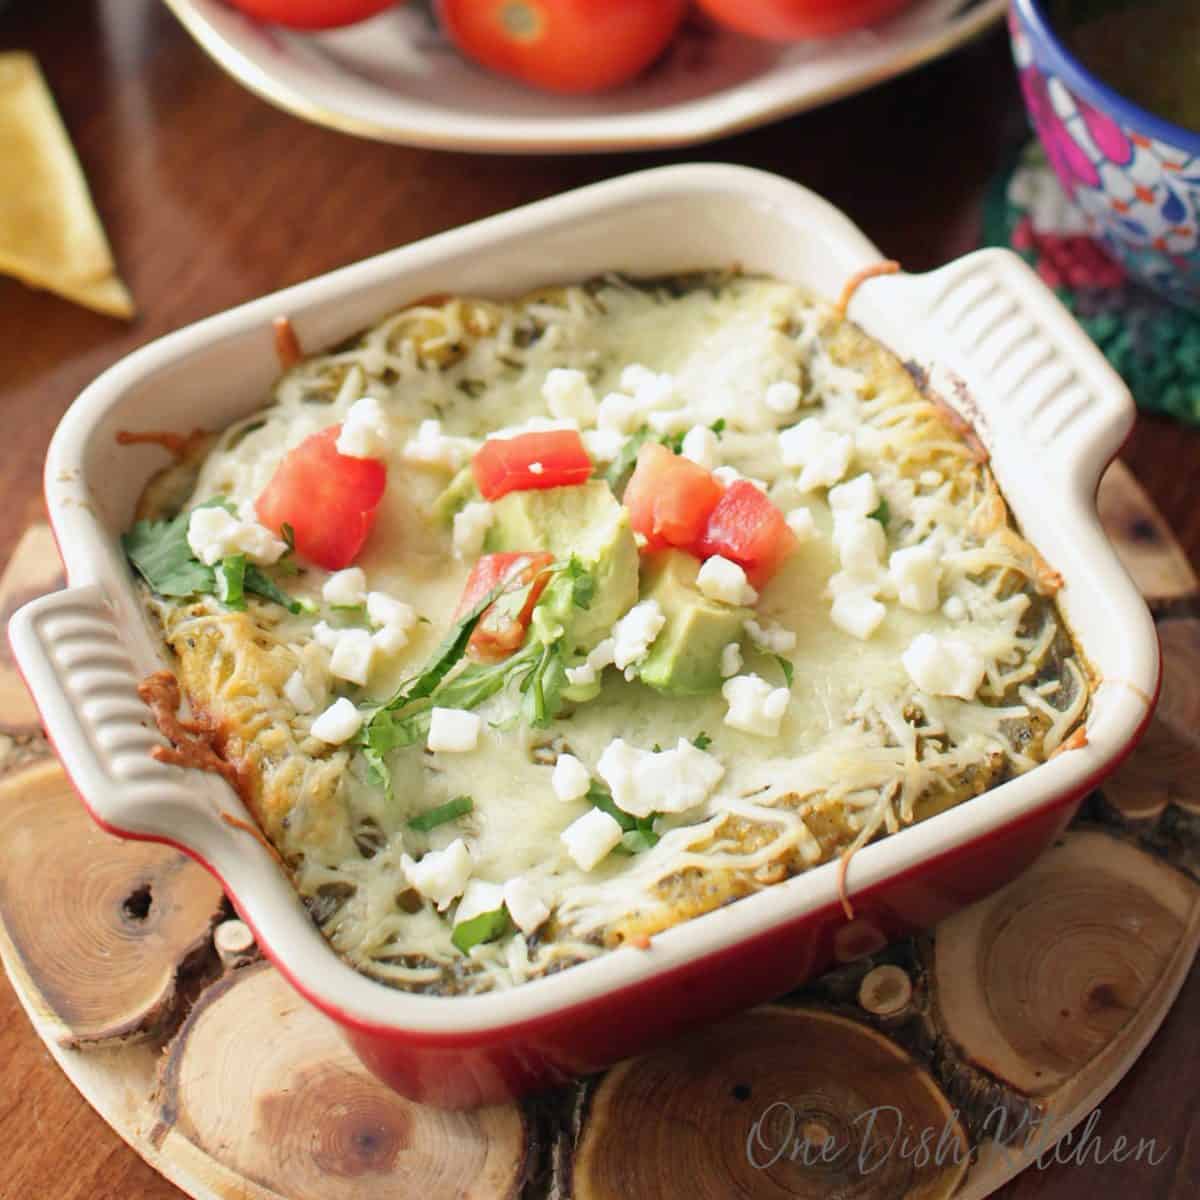 Enchiladas topped with crumbled cotija cheese and chopped avocado and tomatoes in a small baking dish on a wooden trivet.